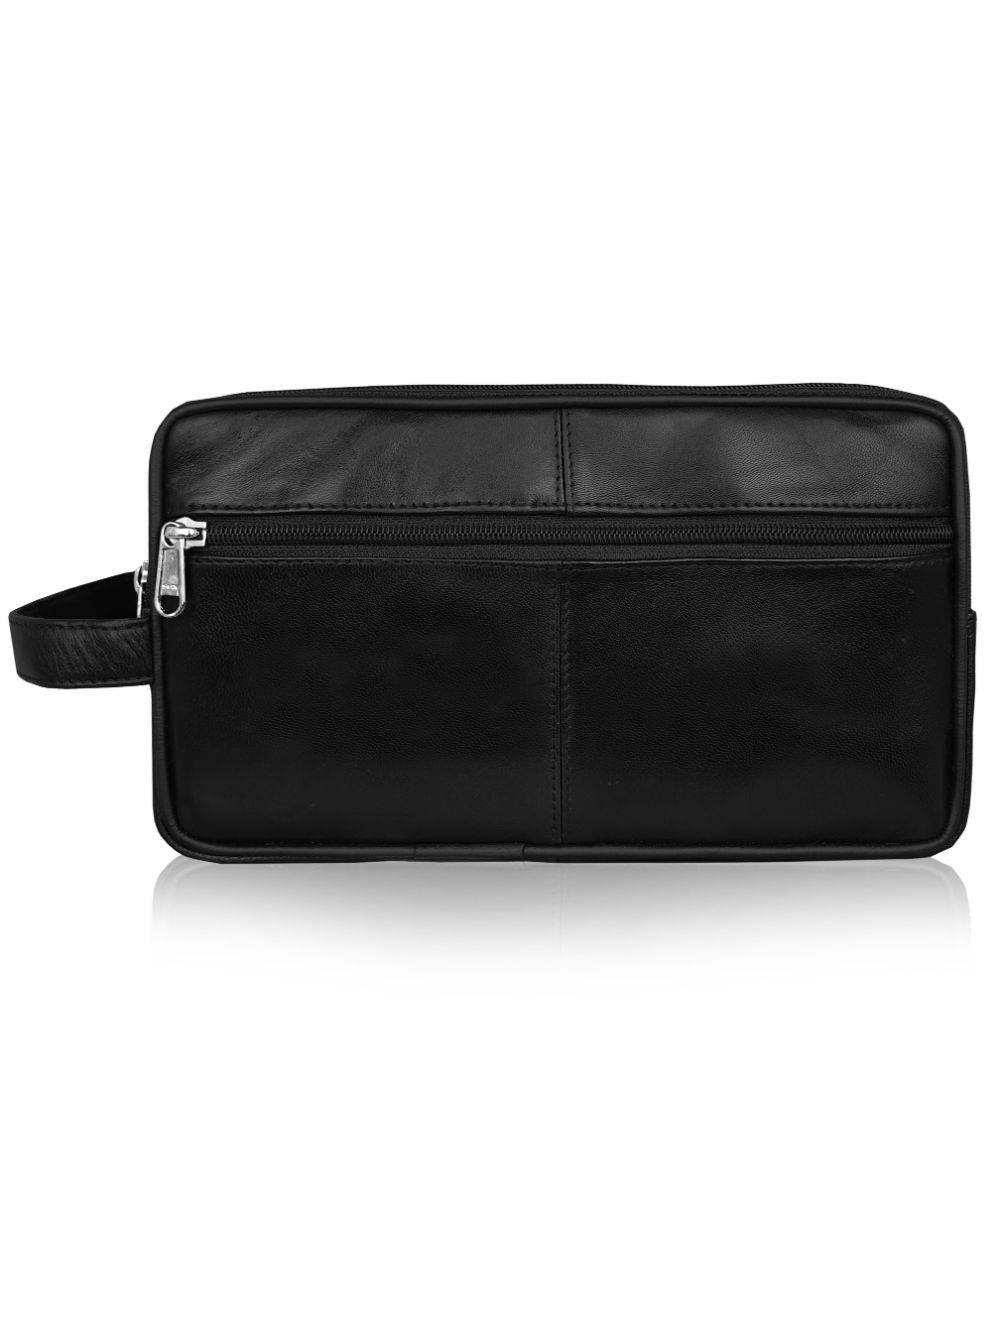 Genuine Leather Toiletry Bag - Travel Wash Bag With Carry Handle -R215